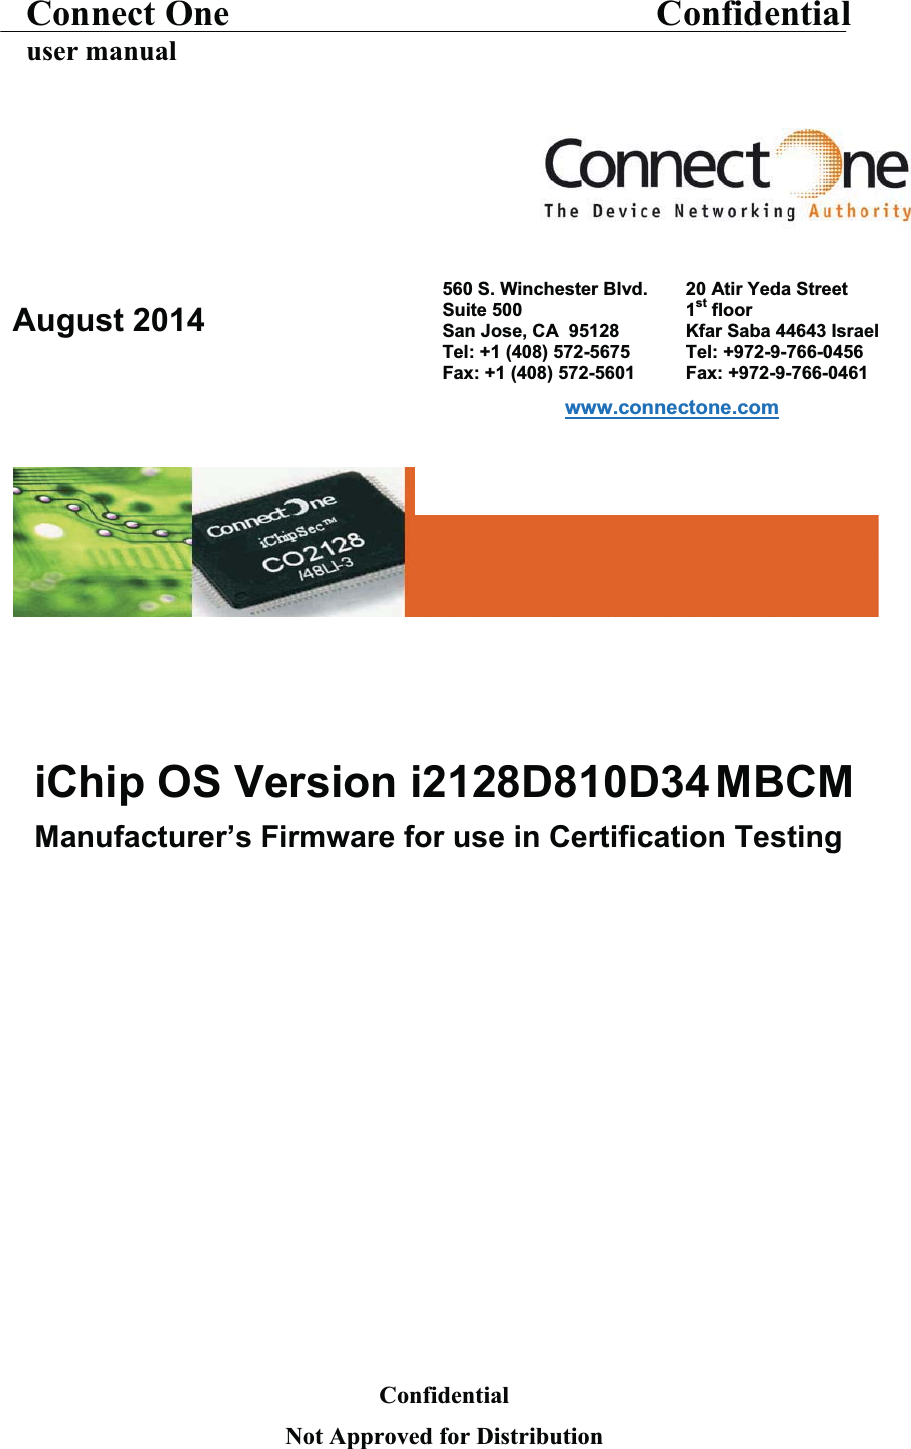 Connect One Confidentialuser manualAugust 2014iChip OS Version i2128D810D34 MBCMManufacturer’s Firmware for use in Certification Testing560 S. Winchester Blvd. 20 Atir Yeda StreetSuite 500 1st floorSan Jose, CA 95128 Kfar Saba 44643 IsraelTel: +1 (408) 572-5675 Tel: +972-9-766-0456Fax: +1 (408) 572-5601 Fax: +972-9-766-0461www.connectone.comConfidentialNot Approved for Distribution